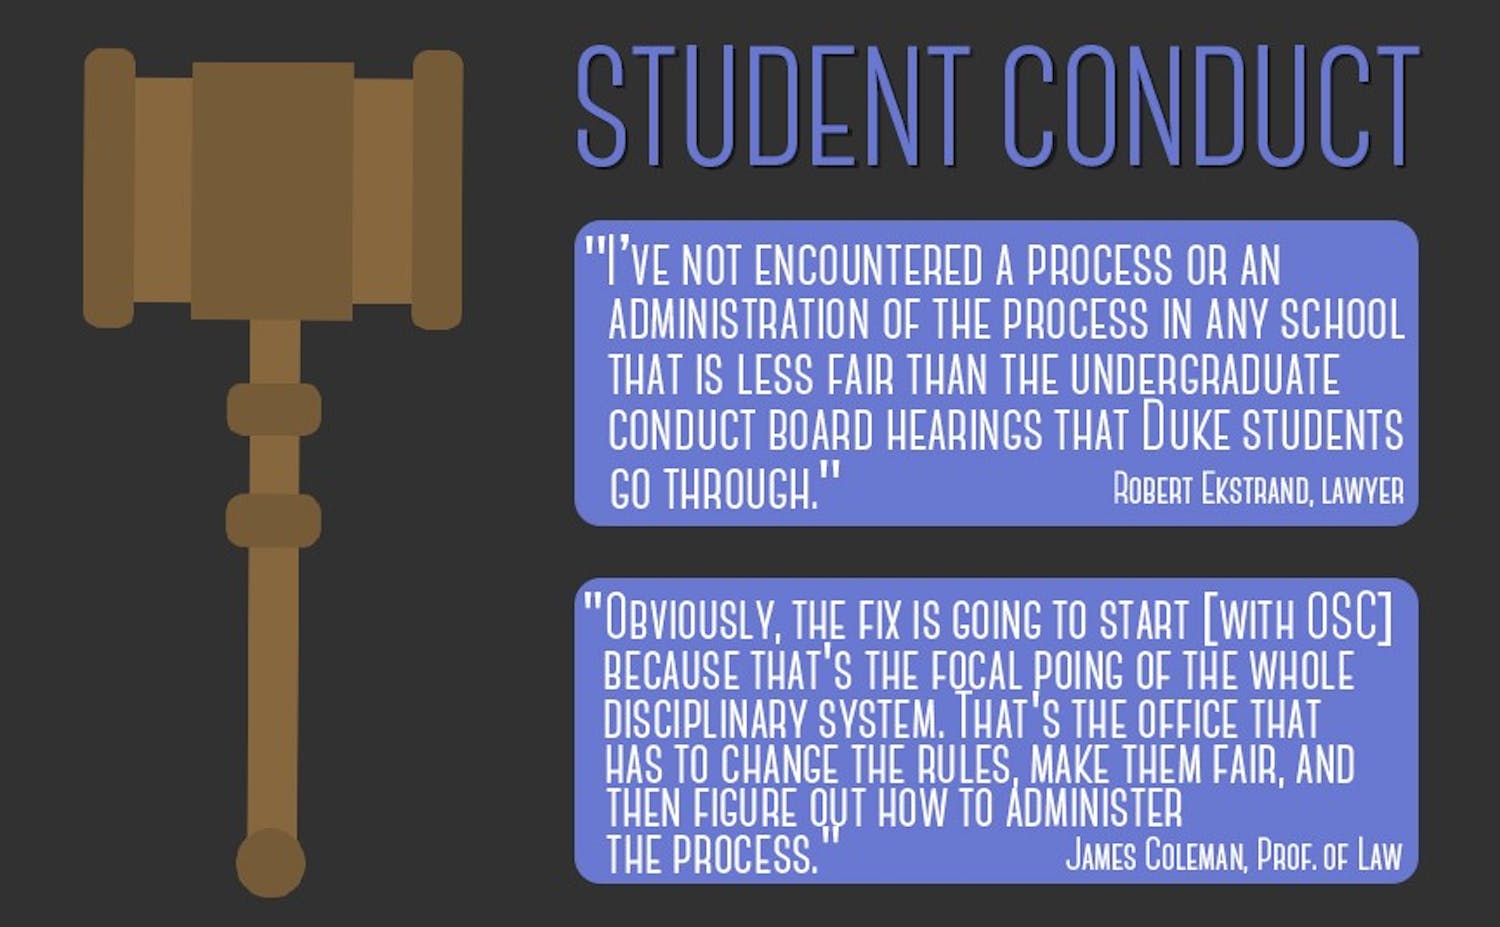 Legal experts took aim at Duke's student conduct process.